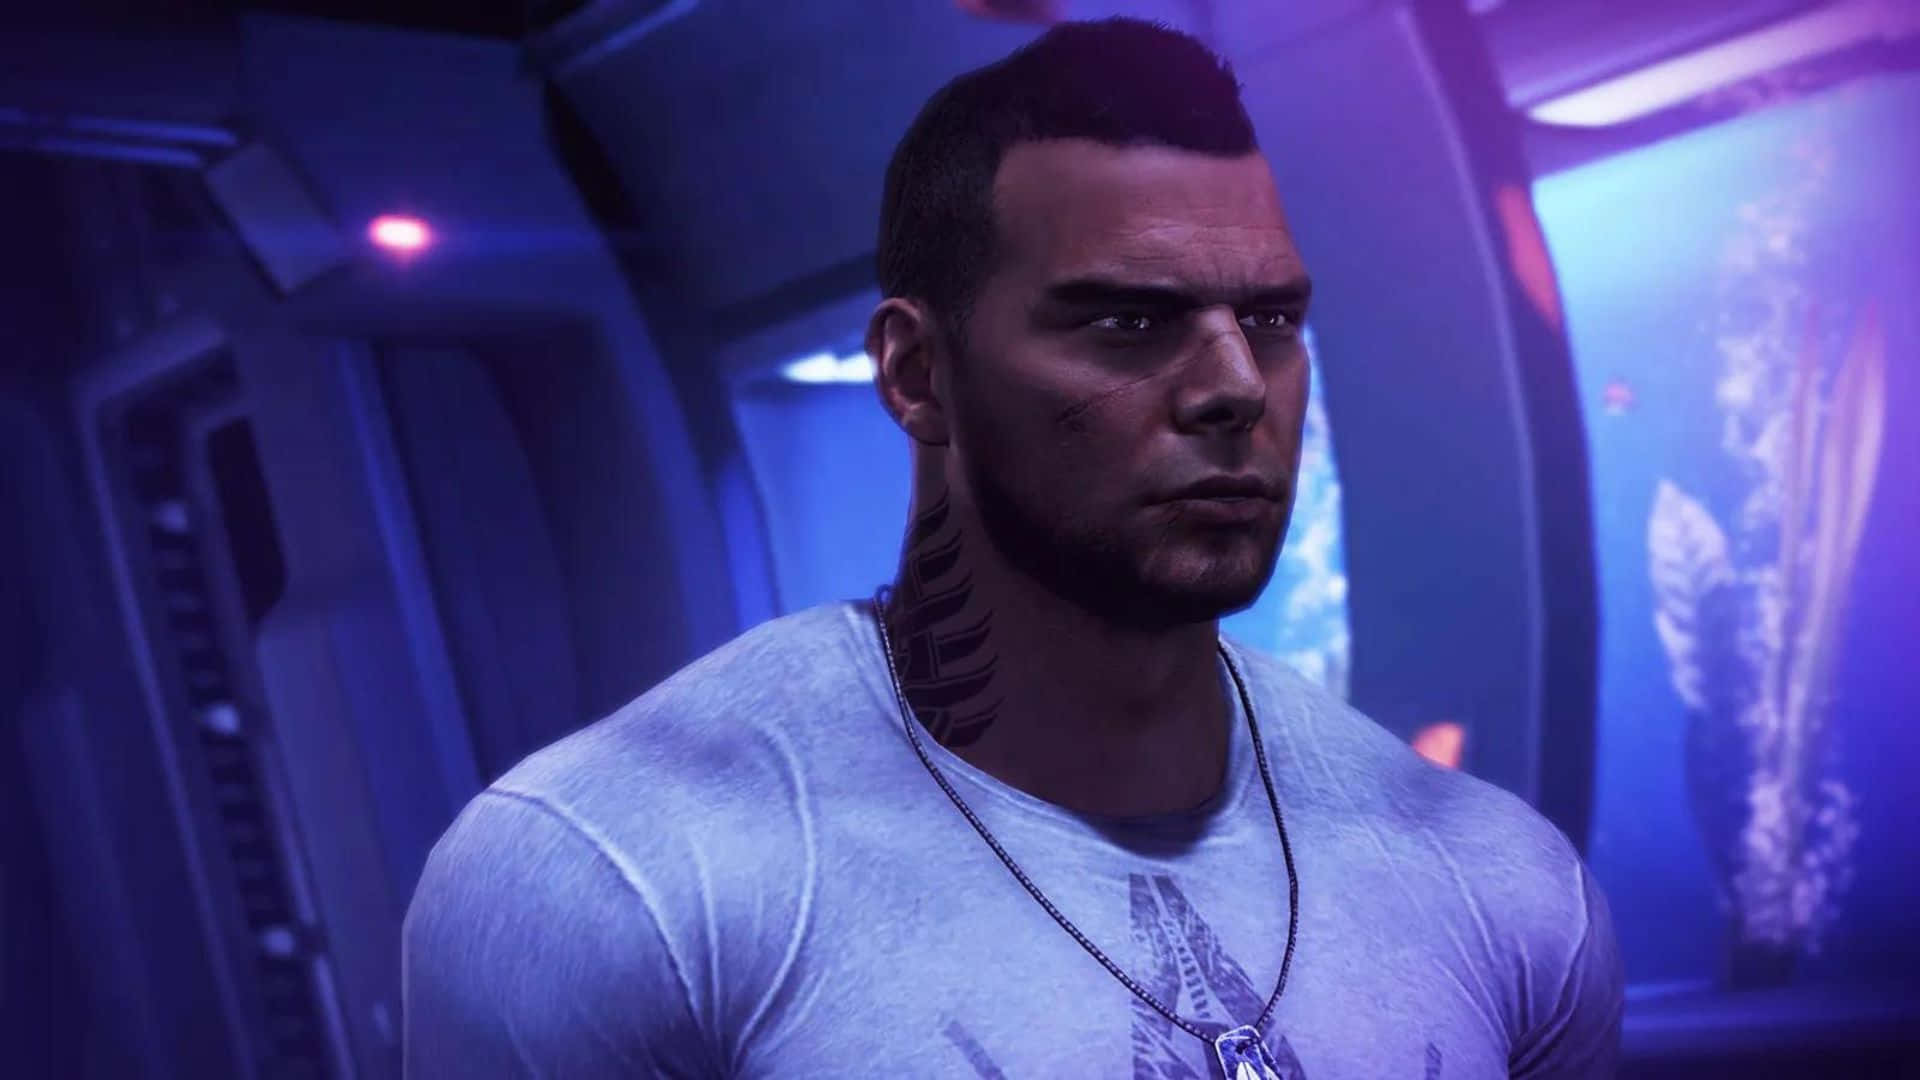 James Vega - A Formidable Force in the Mass Effect Universe Wallpaper